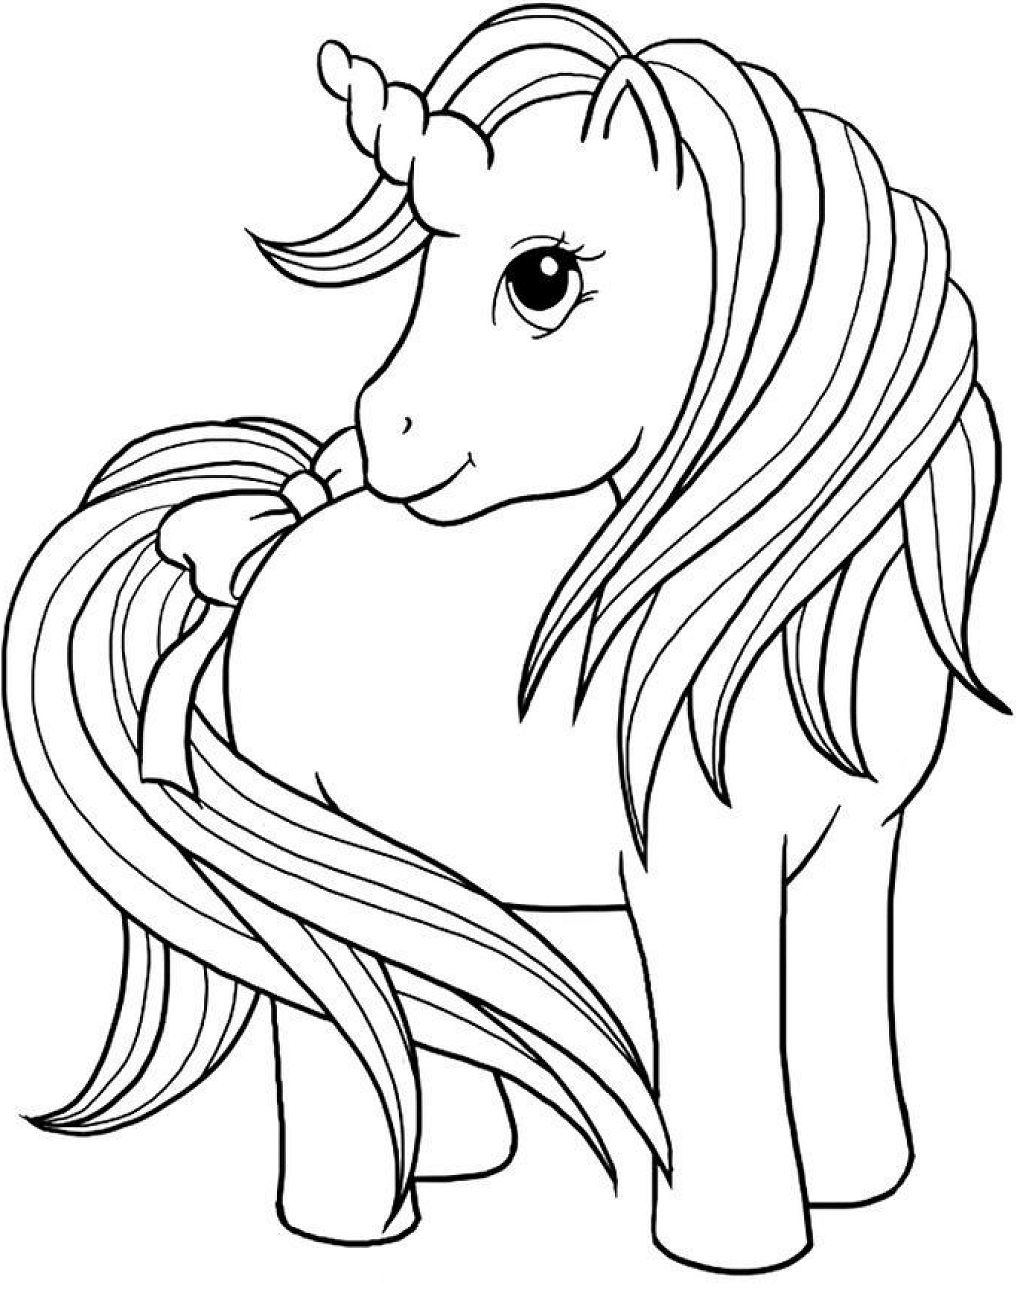 Unicorn With Bow At Tail Coloring Page - Free Printable Coloring Pages ...